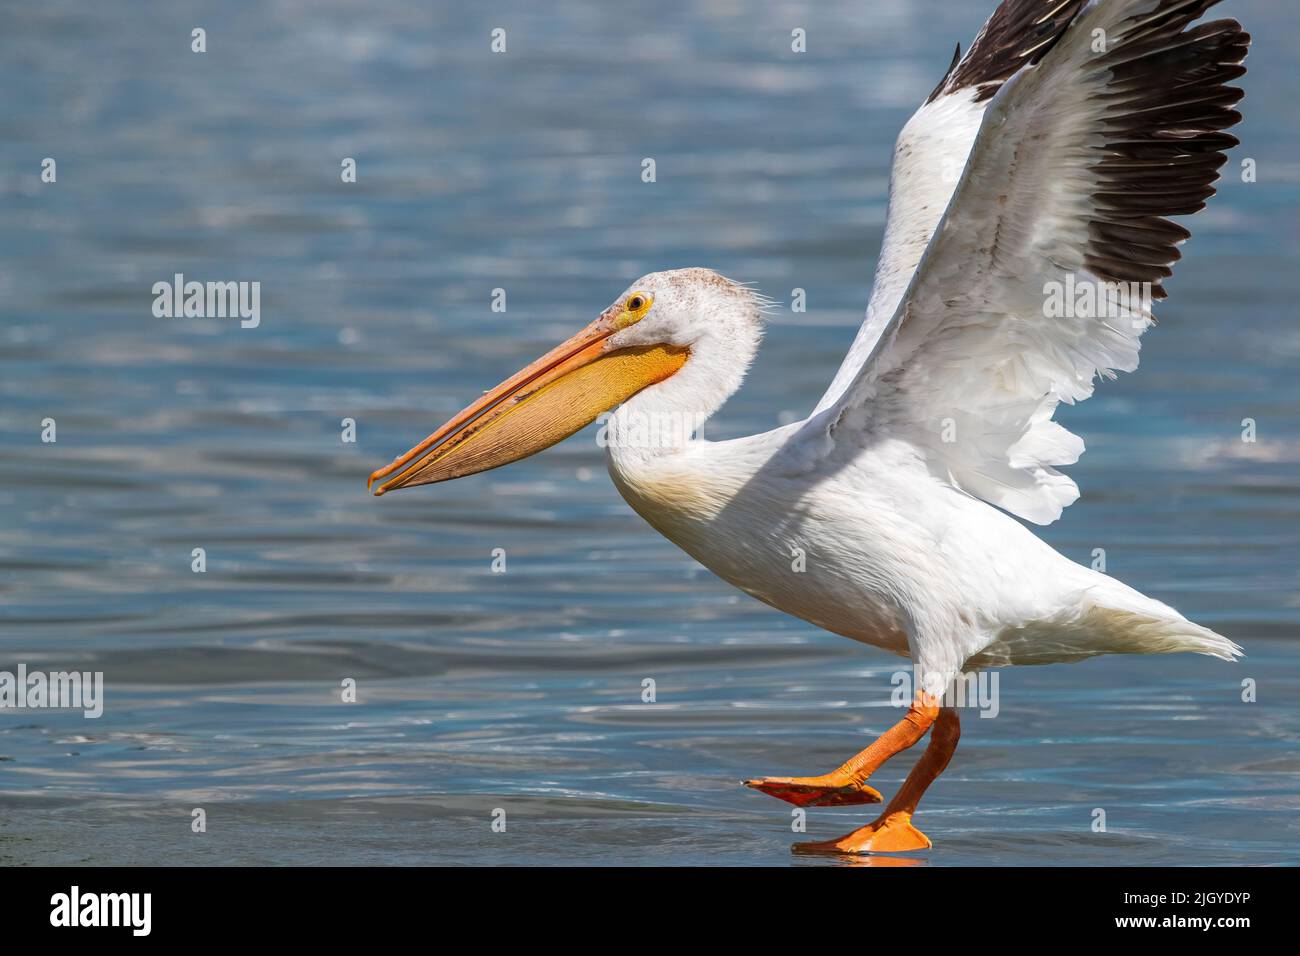 Closeup of an American White Pelican skidding on the water just after landing. Stock Photo